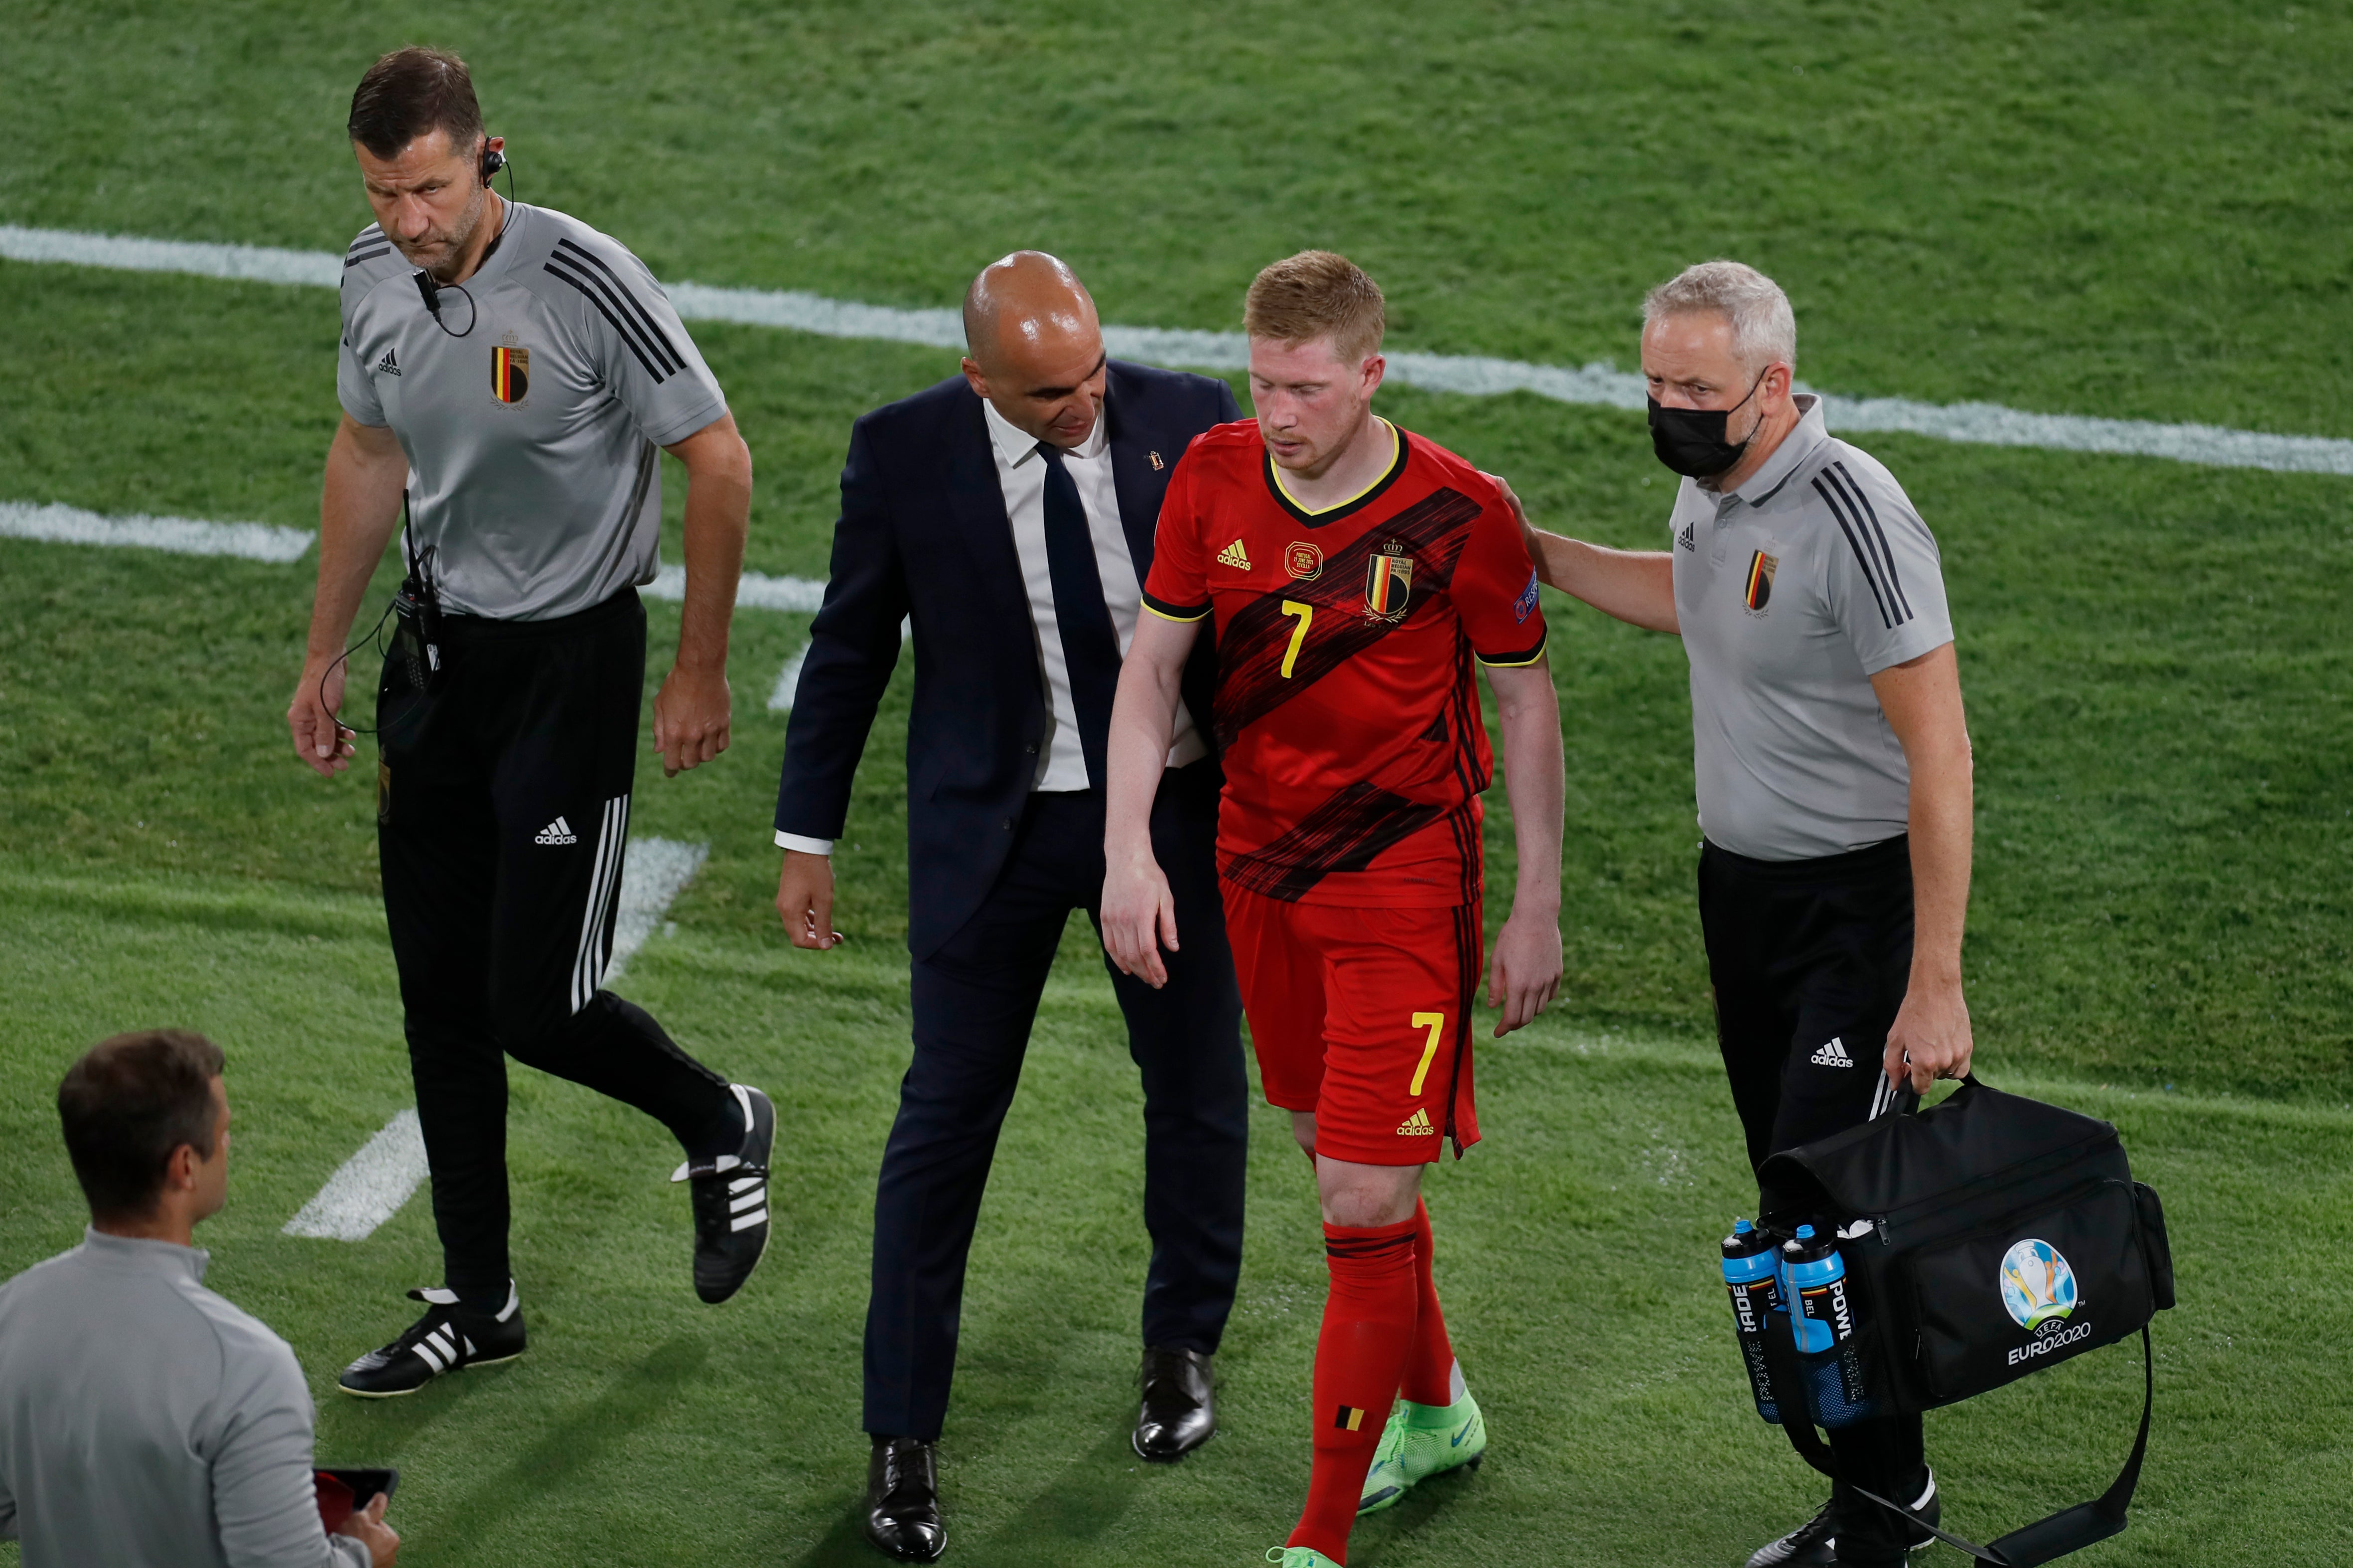 De Bruyne, pictured, and Hazard are both injury doubts for Belgium